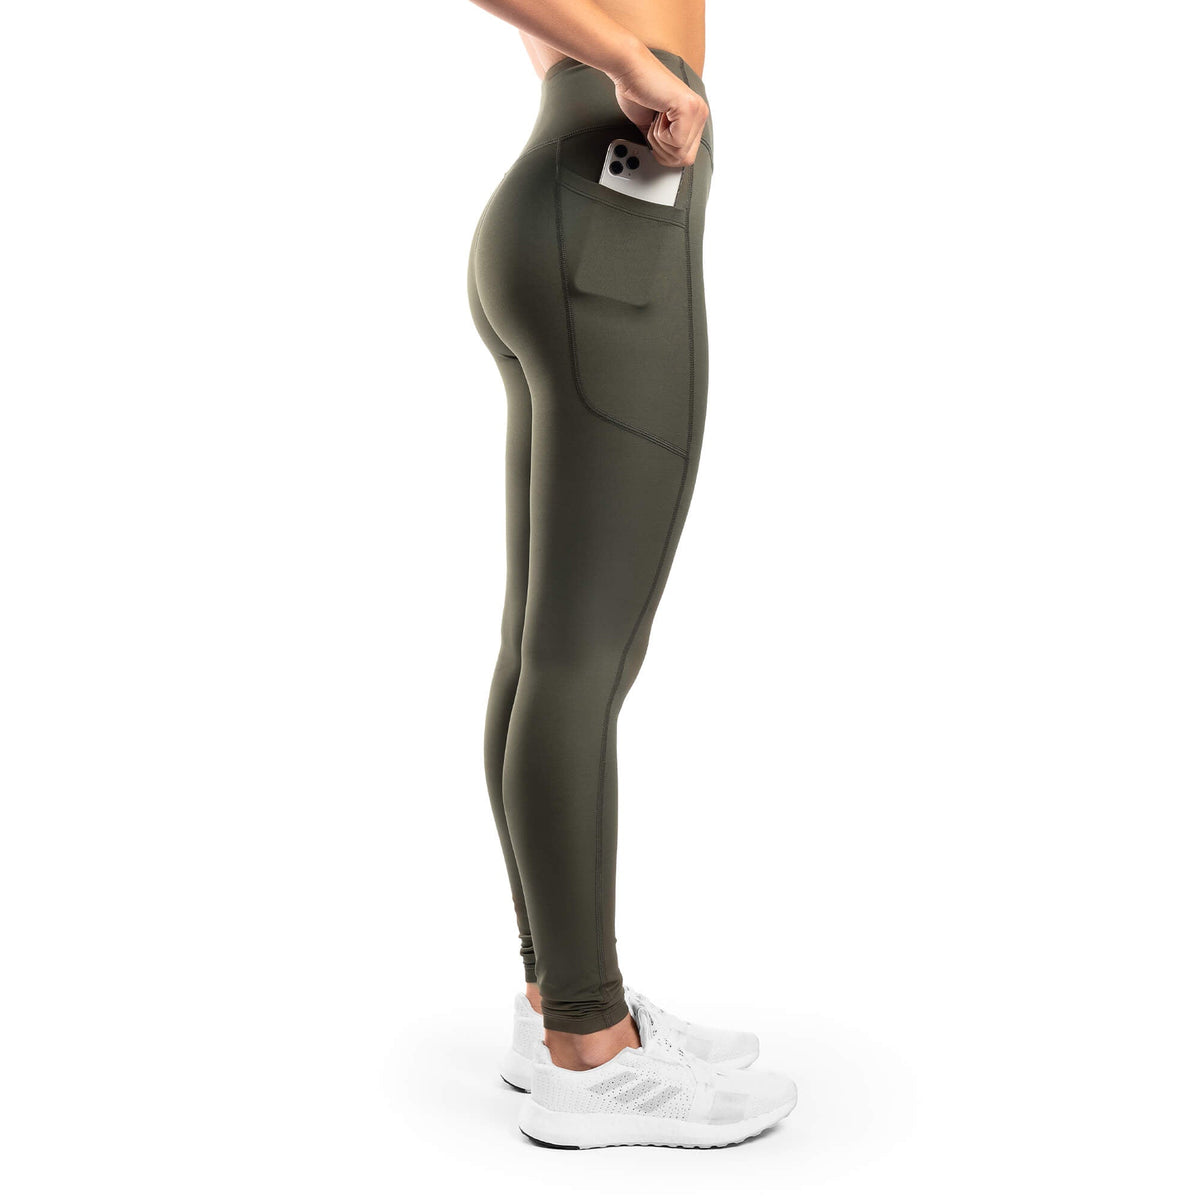 Arsenal High-Waisted Pockets Leggings - Army Green - Rise